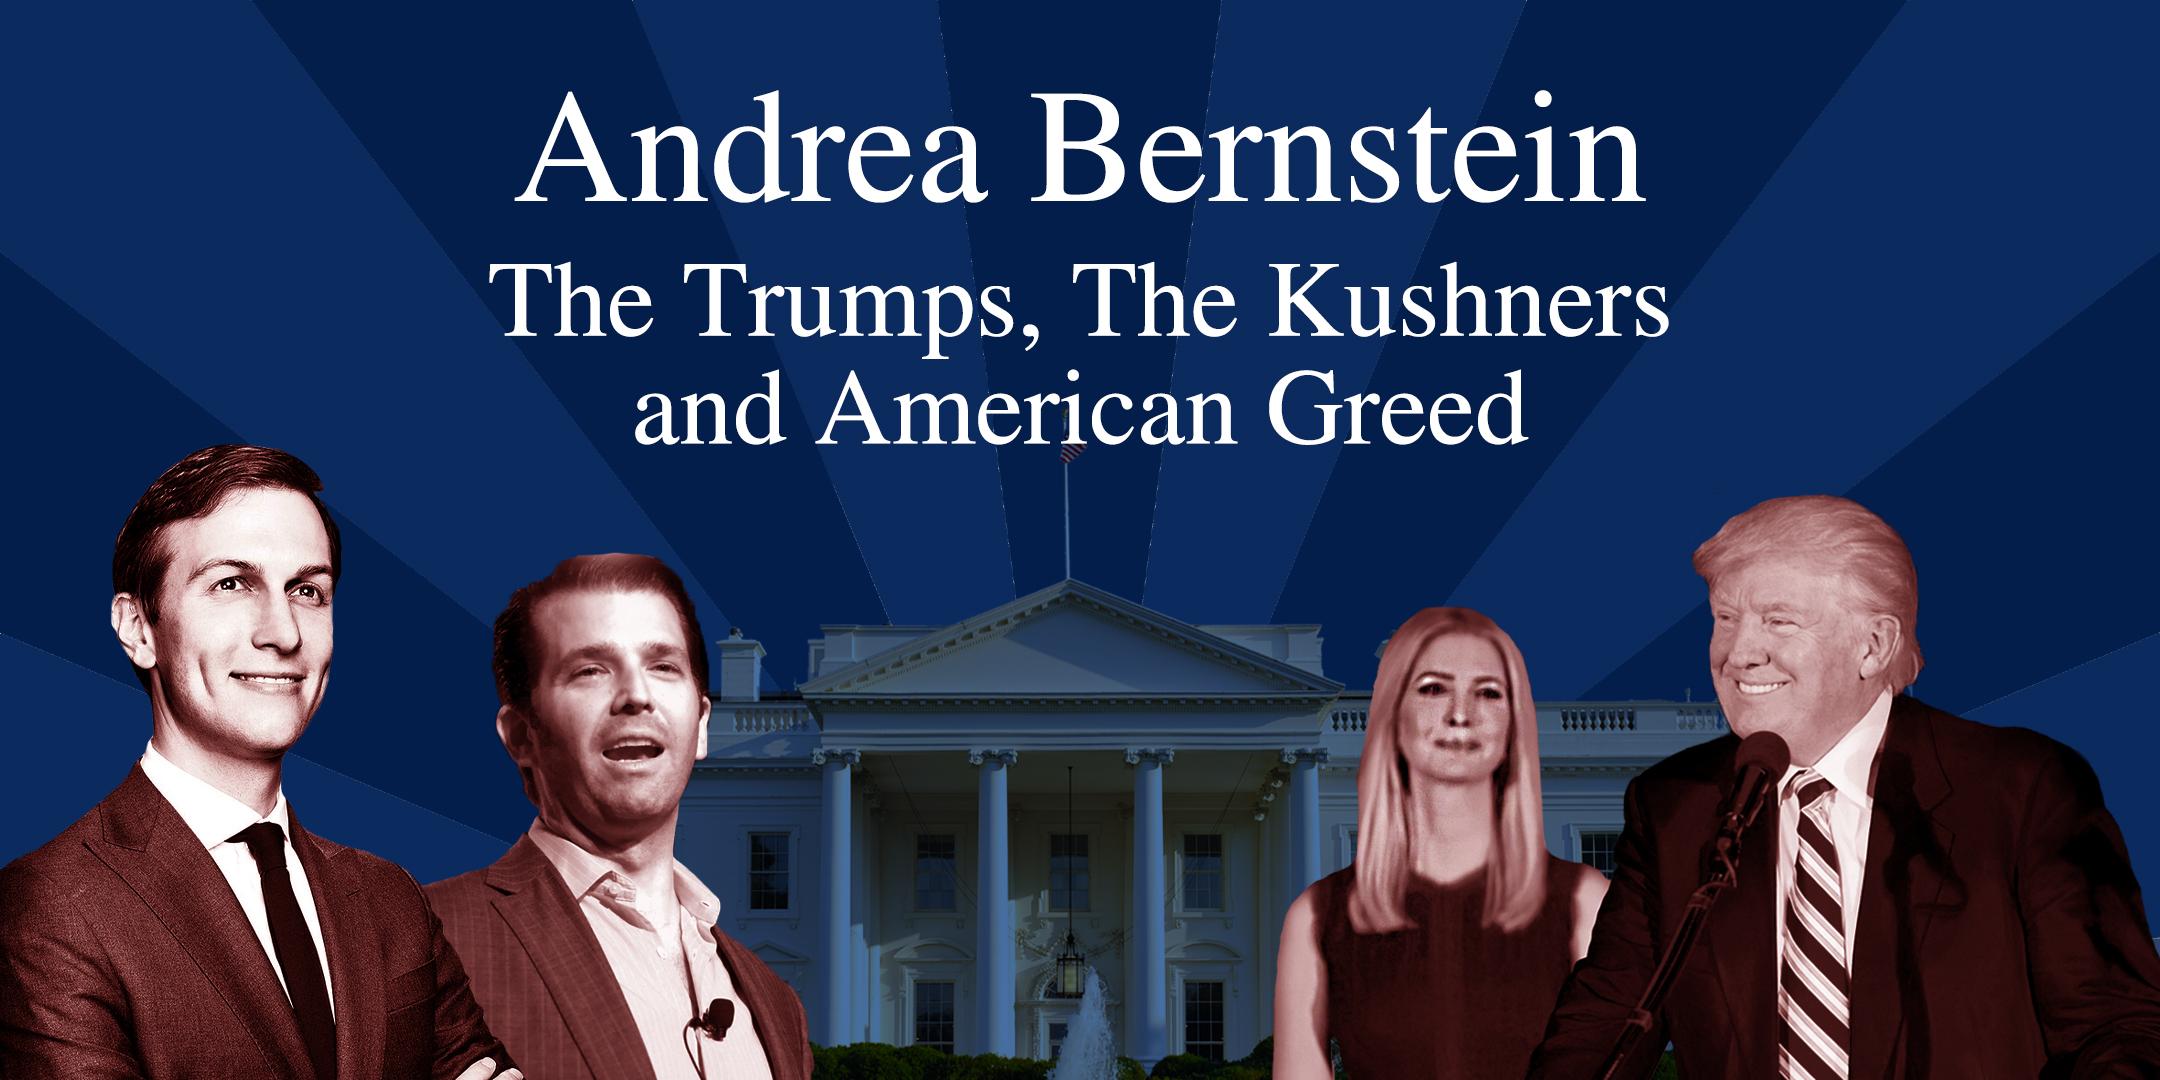 Andrea Bernstein: The Trumps, The Kushners and American Greed